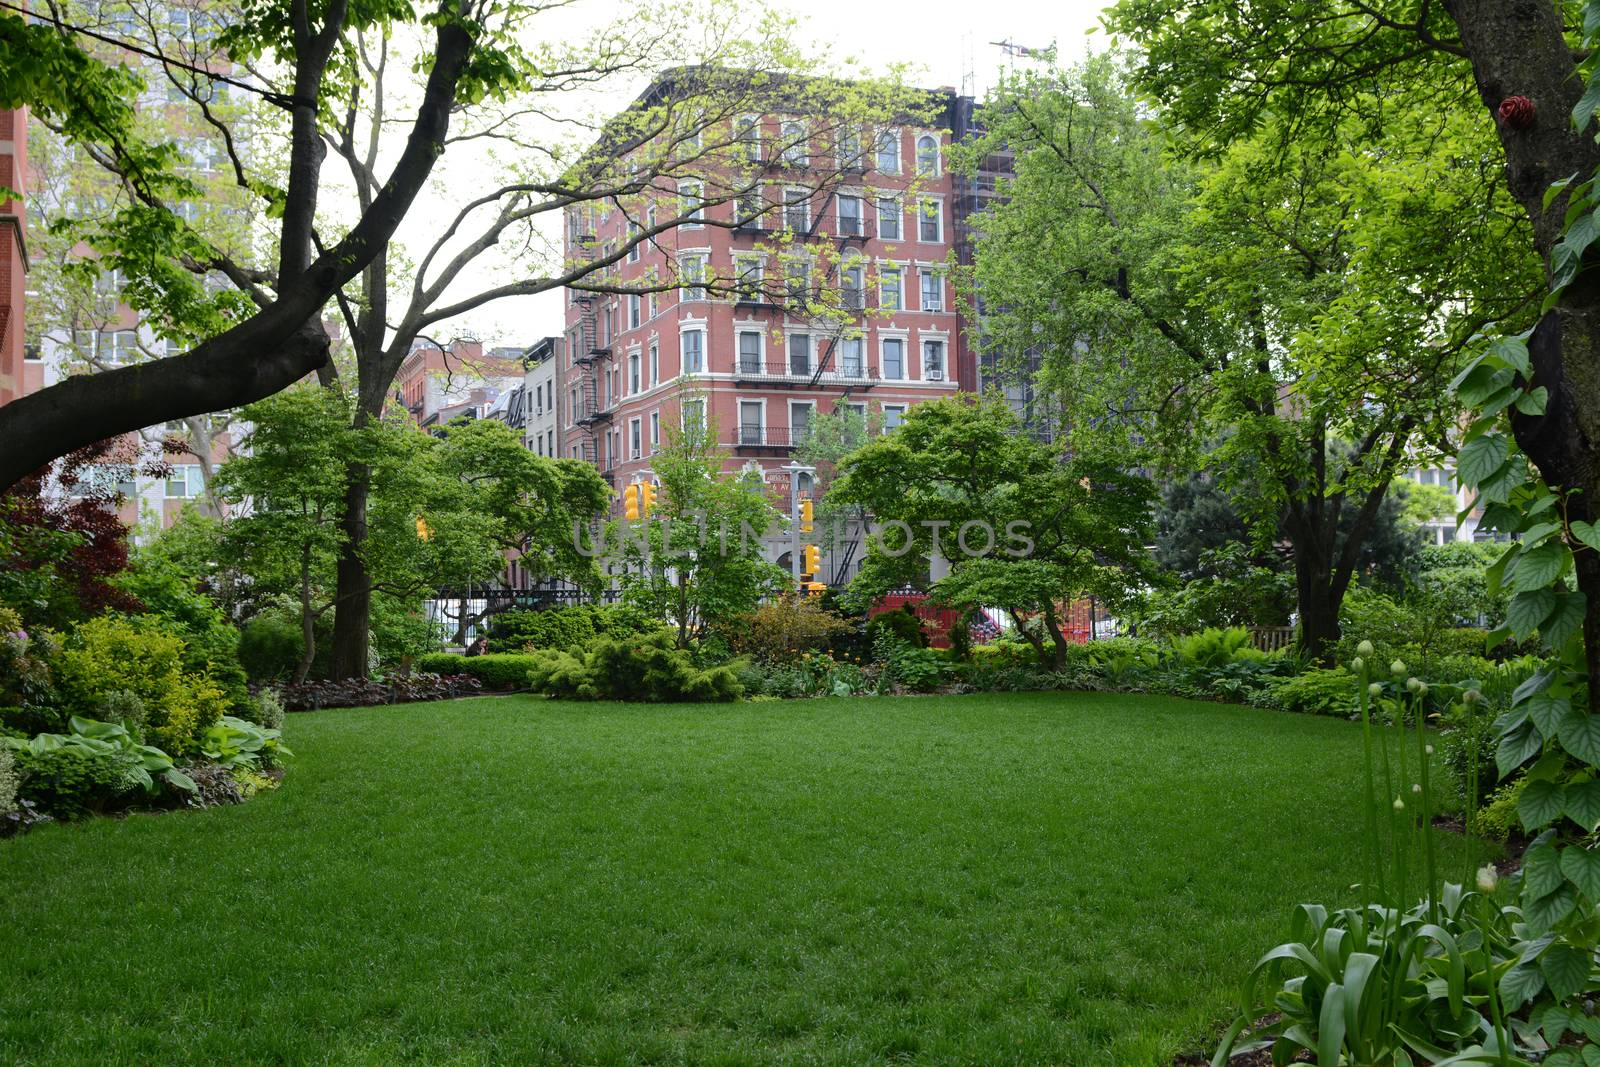 Verdant lawn and flower beds in the peaceful Jefferson Market Garden in Greenwich Village, New York City